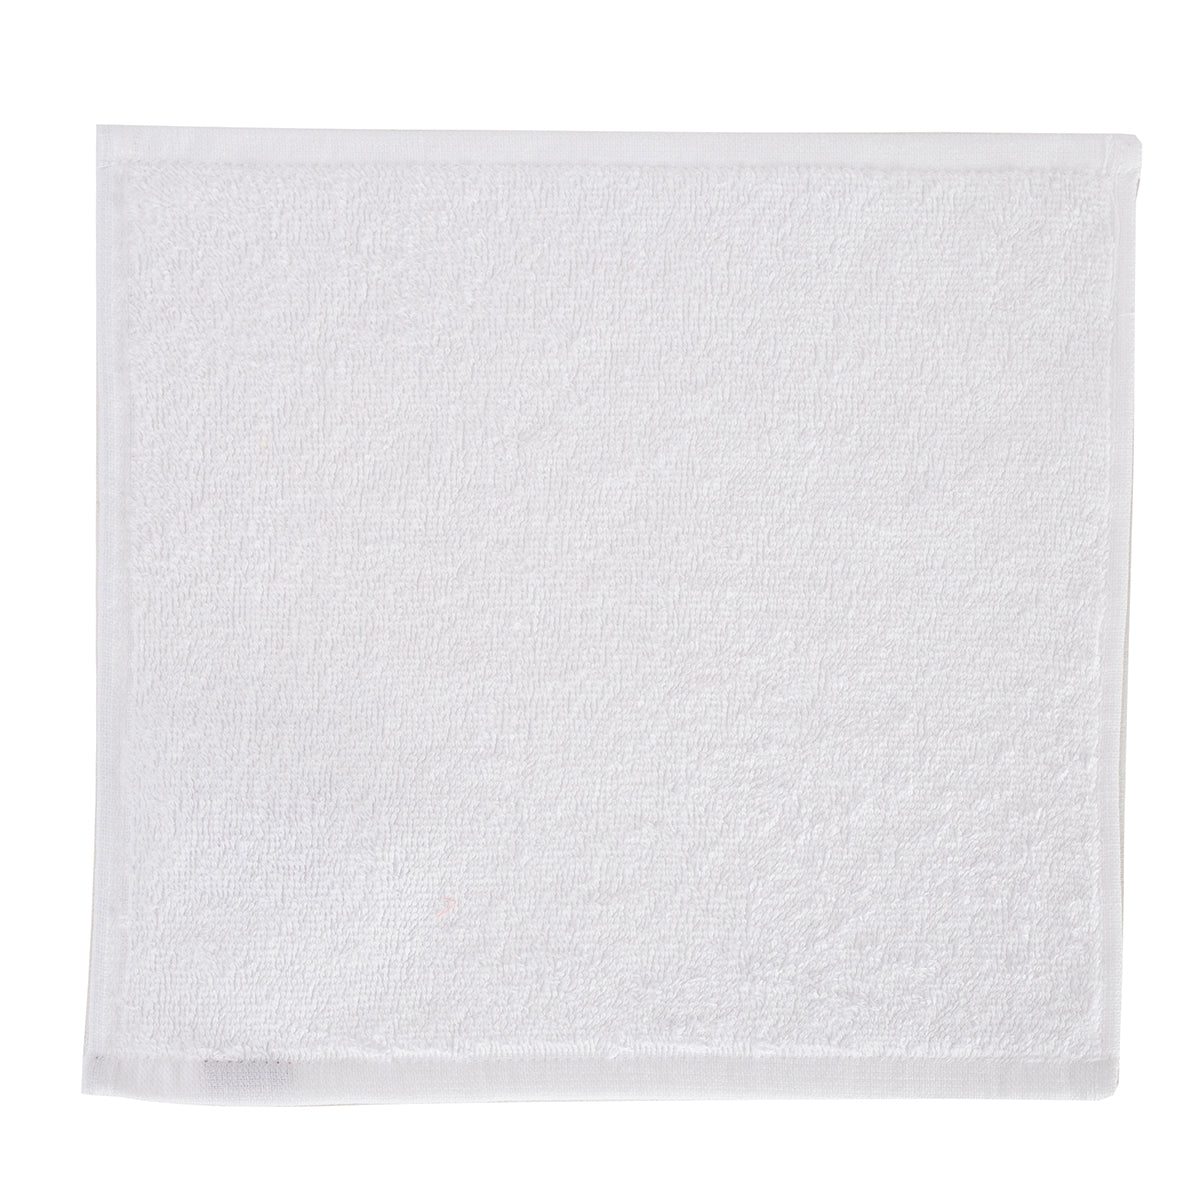 Jeneth Ultra-Soft and Highly Absorbent White Face Towel Set